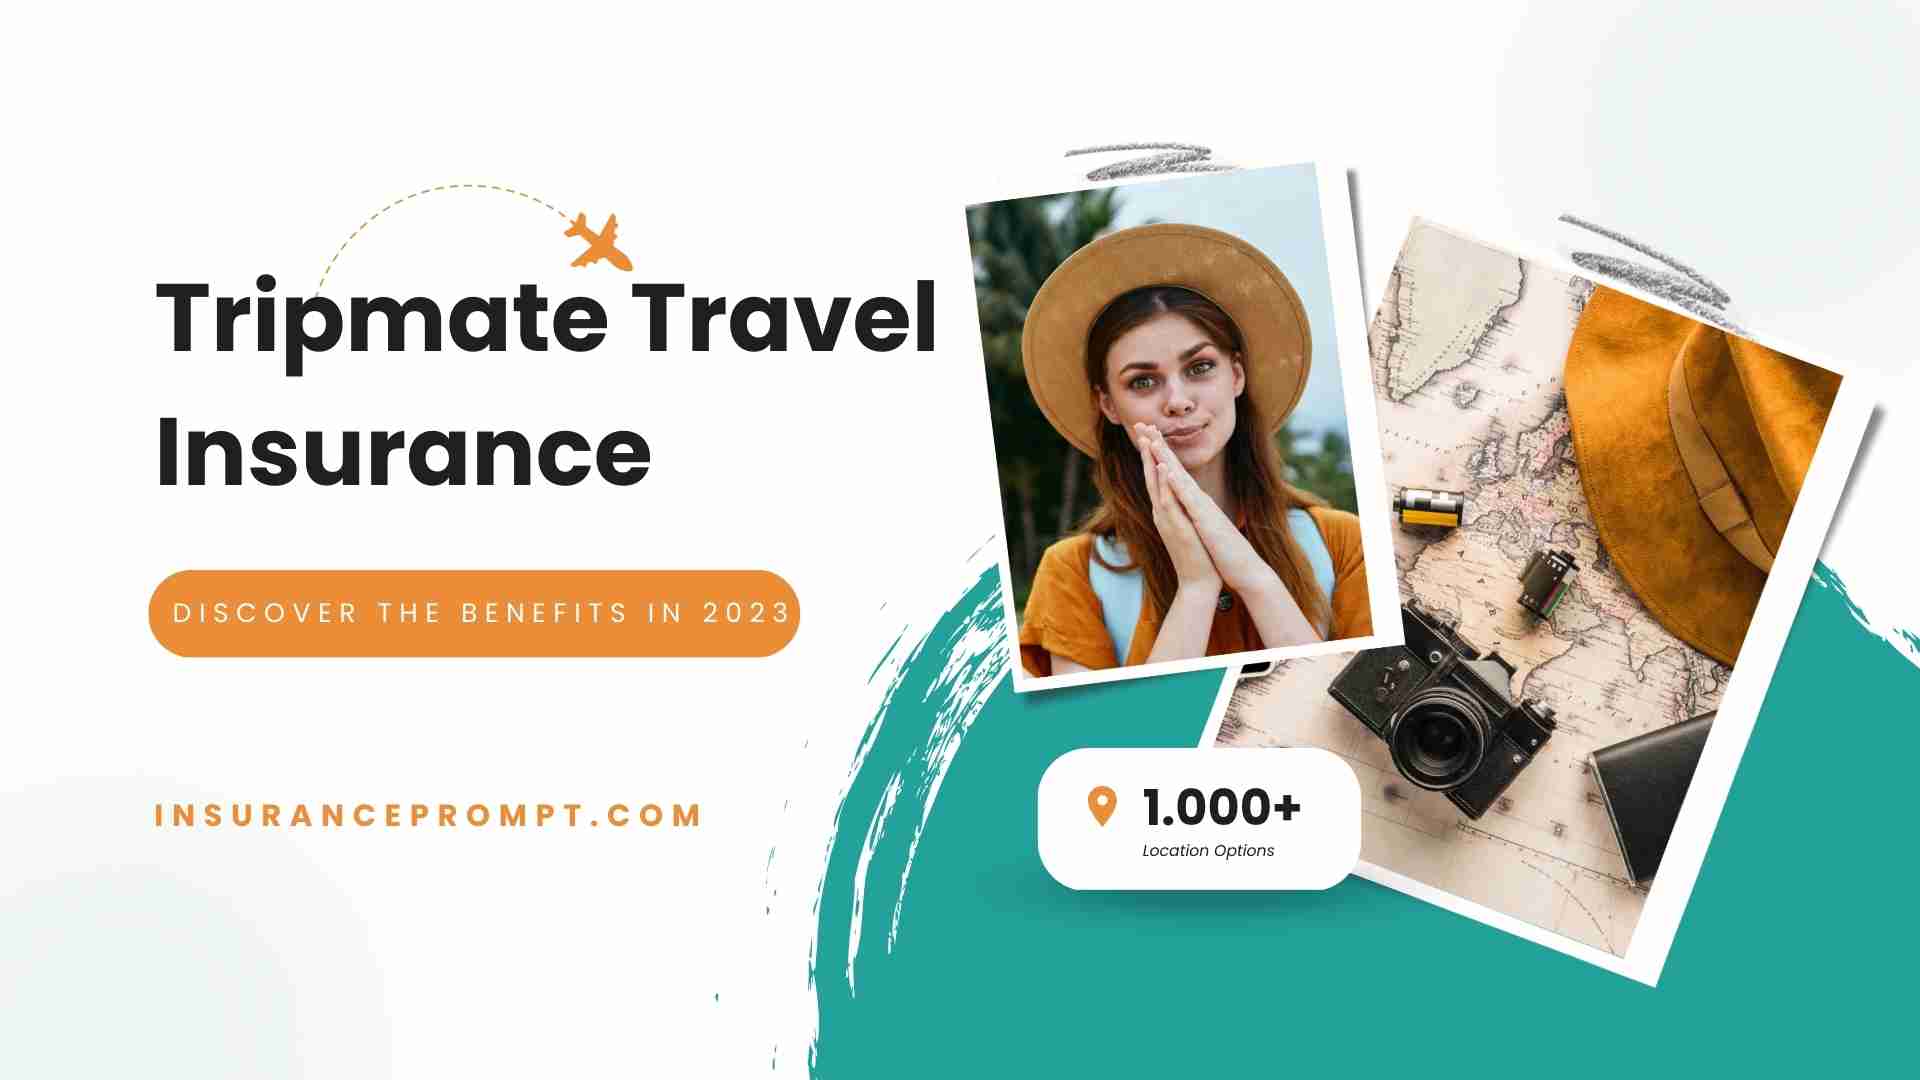 Tripmate Travel Insurance: Discover the Benefits in 2023